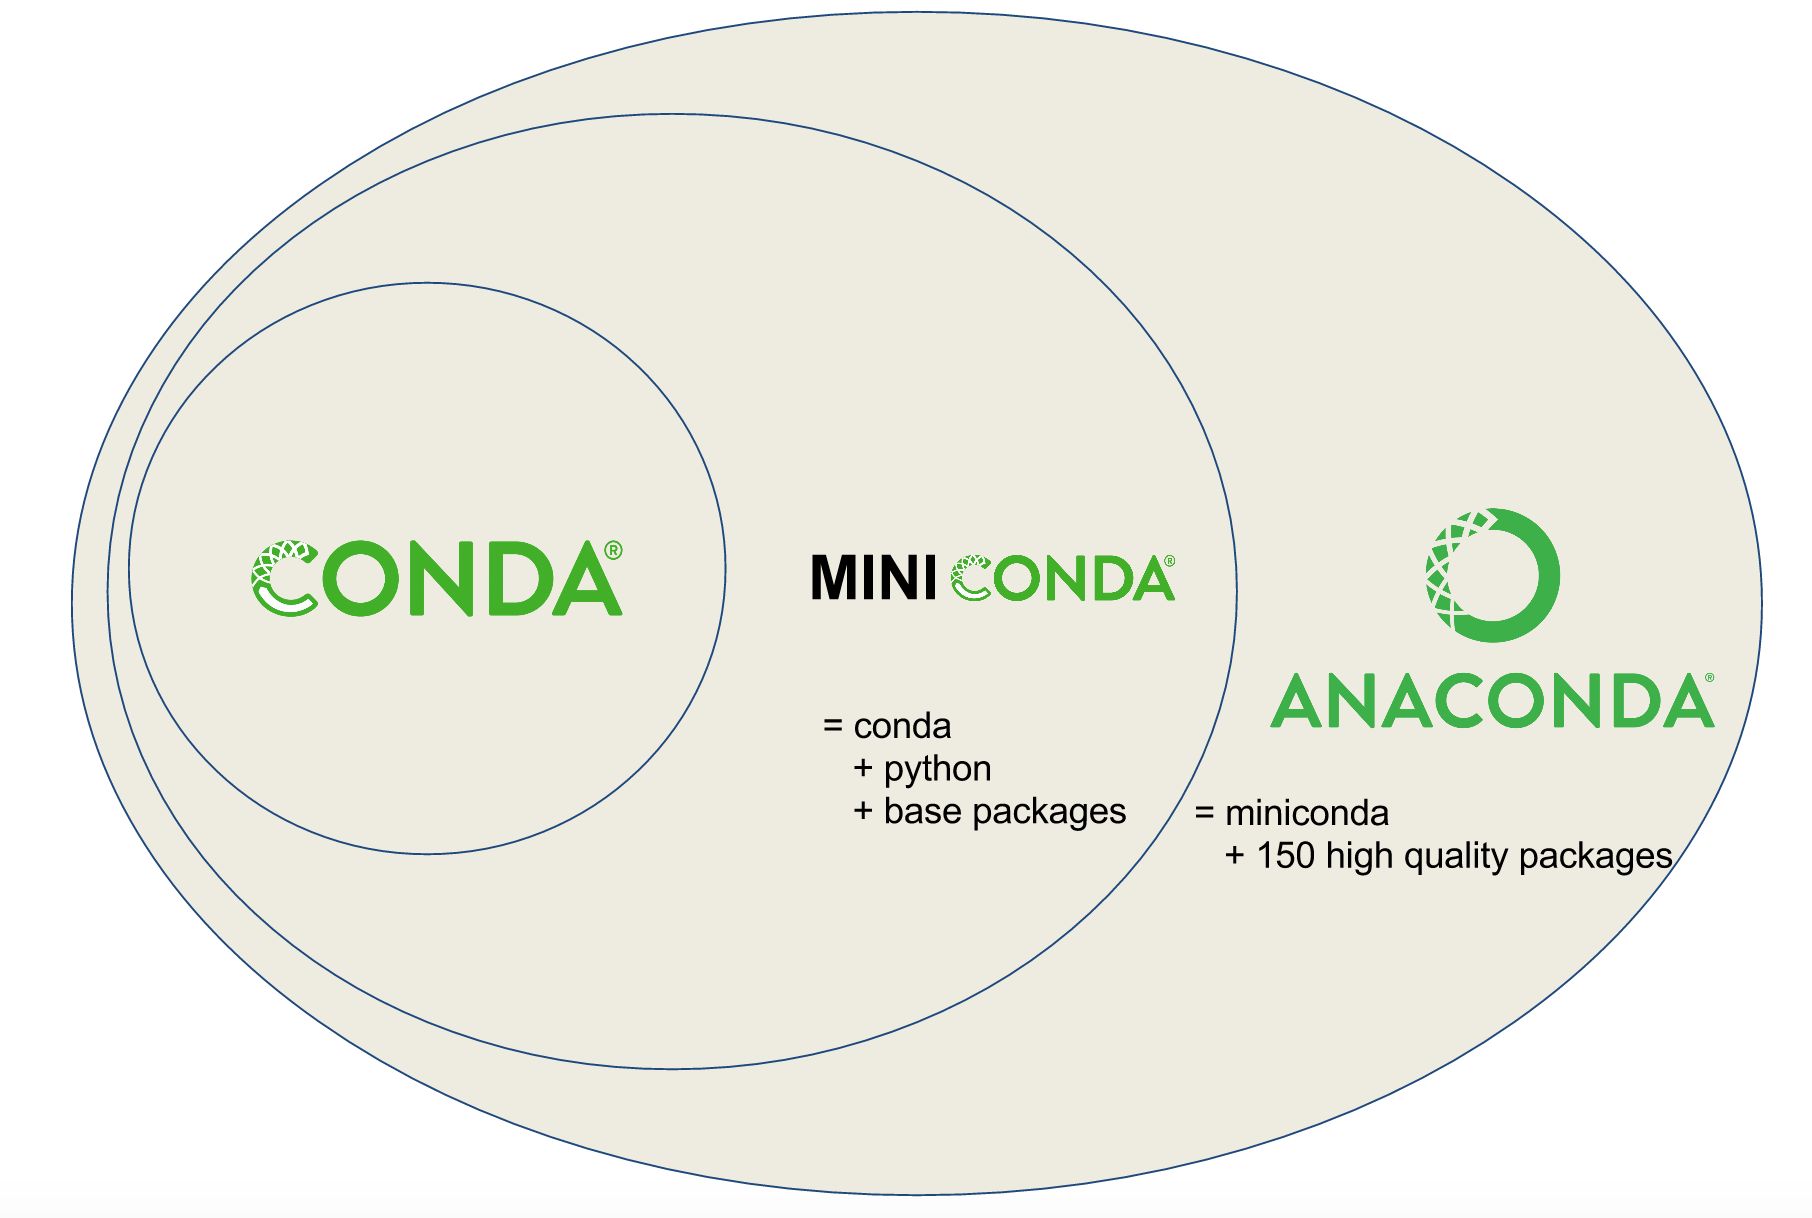 anaconda create environment from requirements.txt